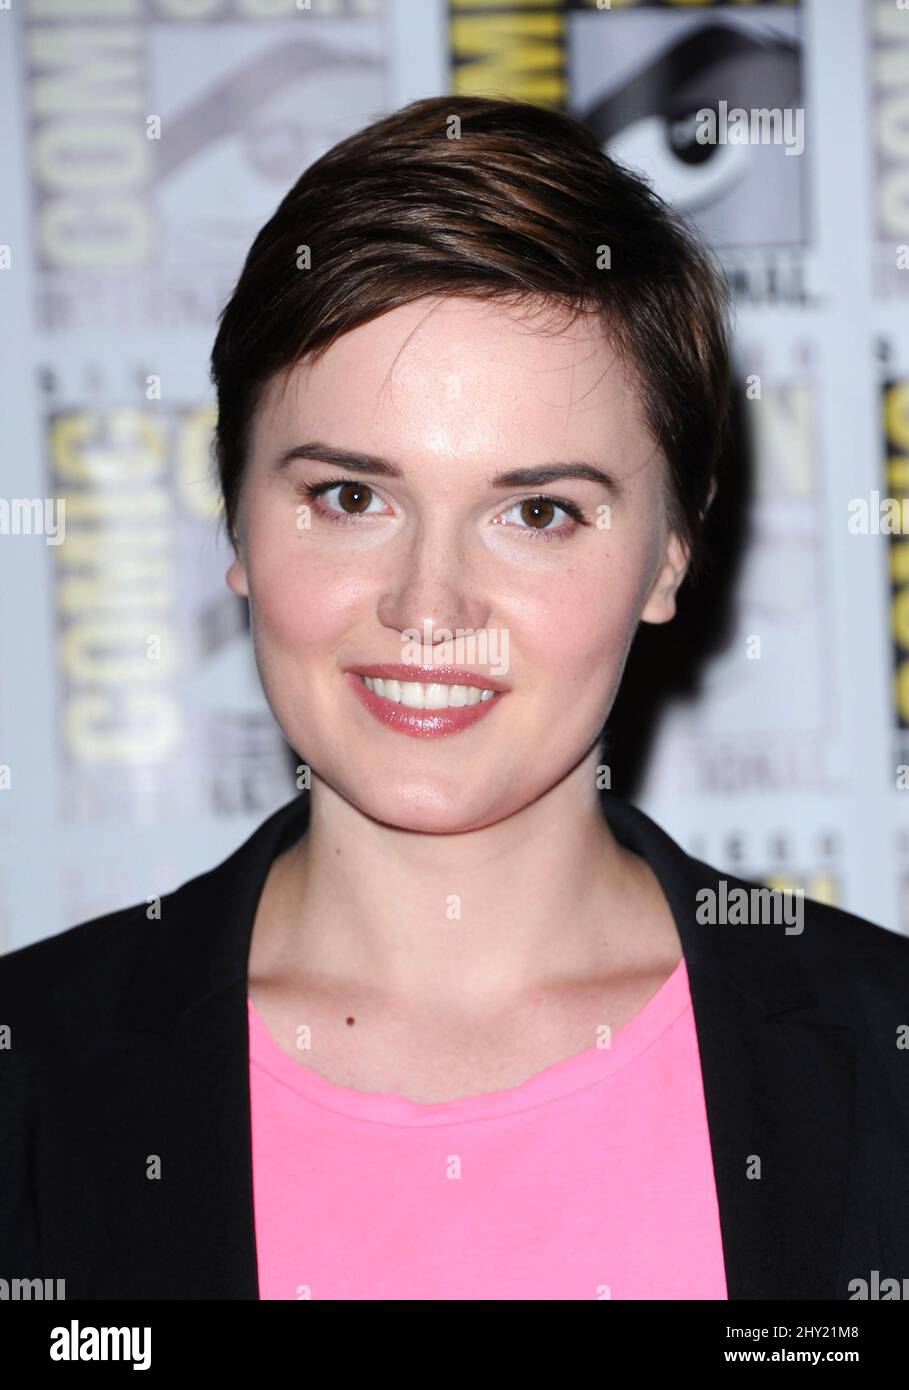 Veronica Roth during Comic-Con 2013 held at the San Diego Convention Center, California. Stock Photo